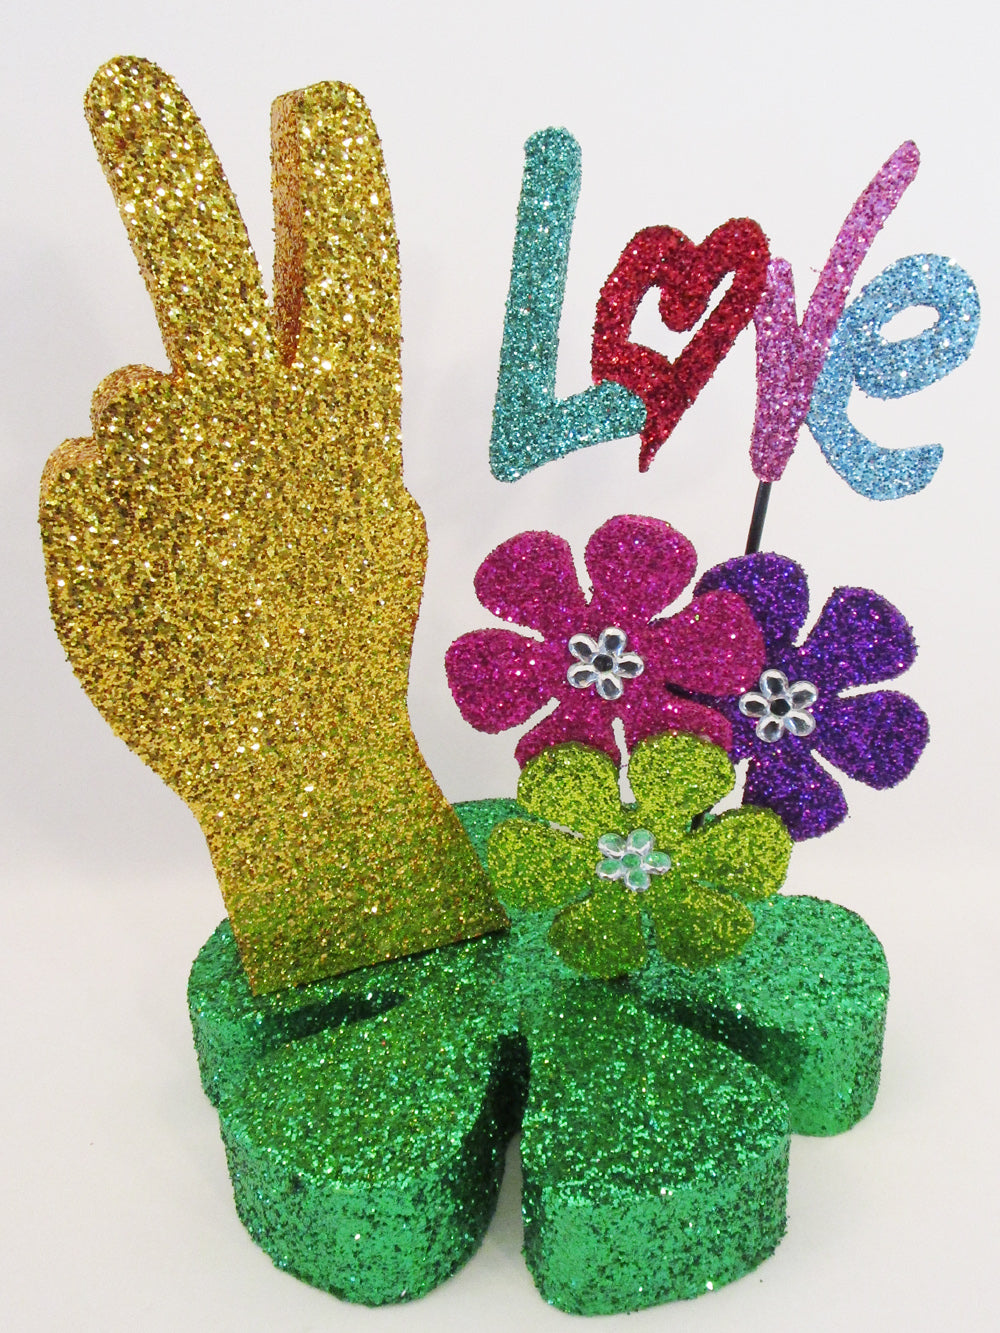 Peace,Love 1960's centerpiece - Designs by Ginny